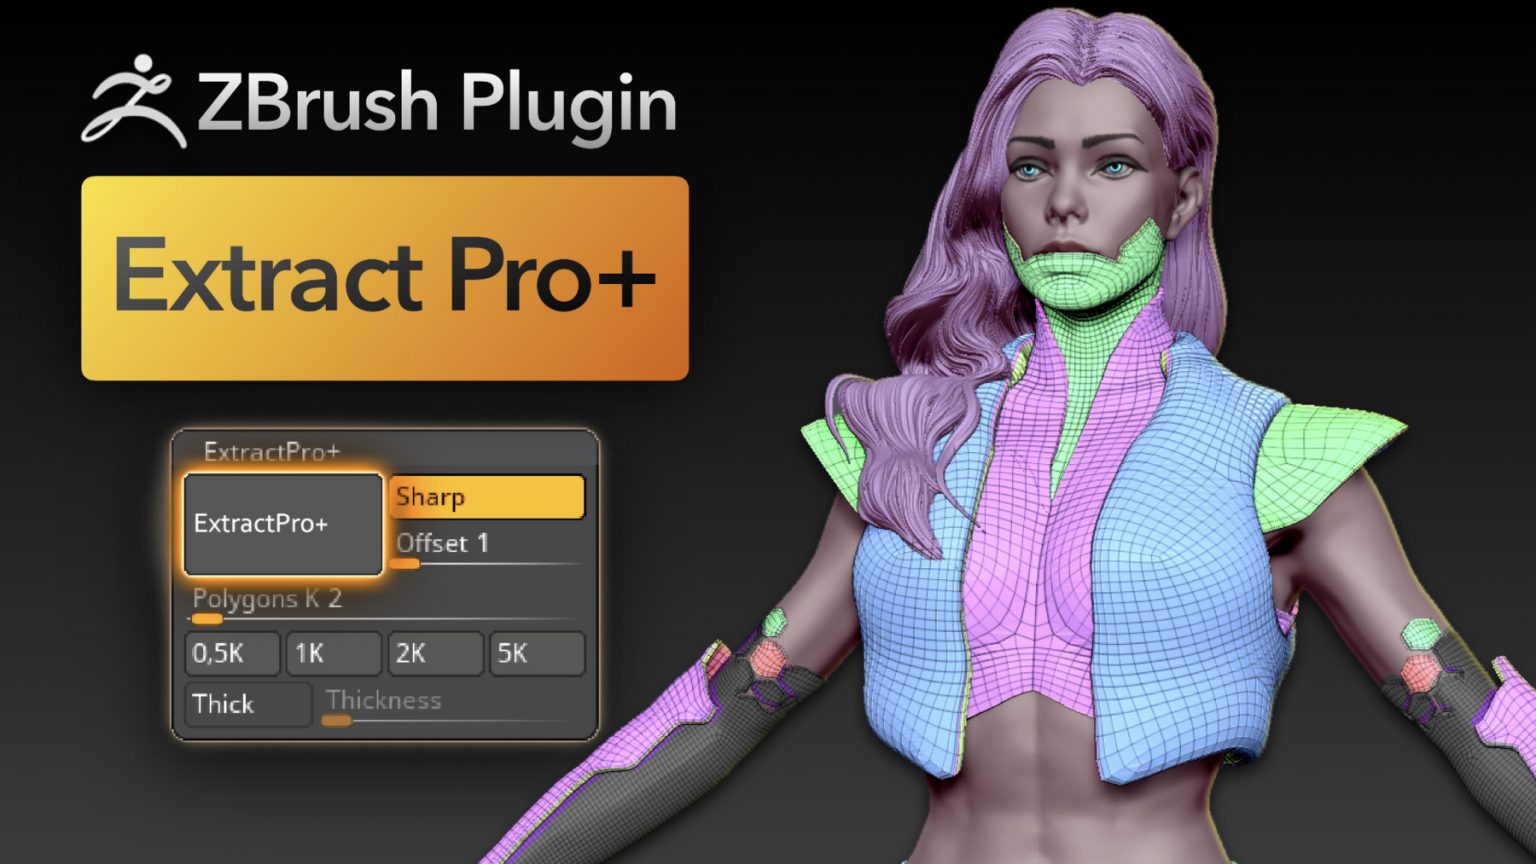 zbrush account recovery